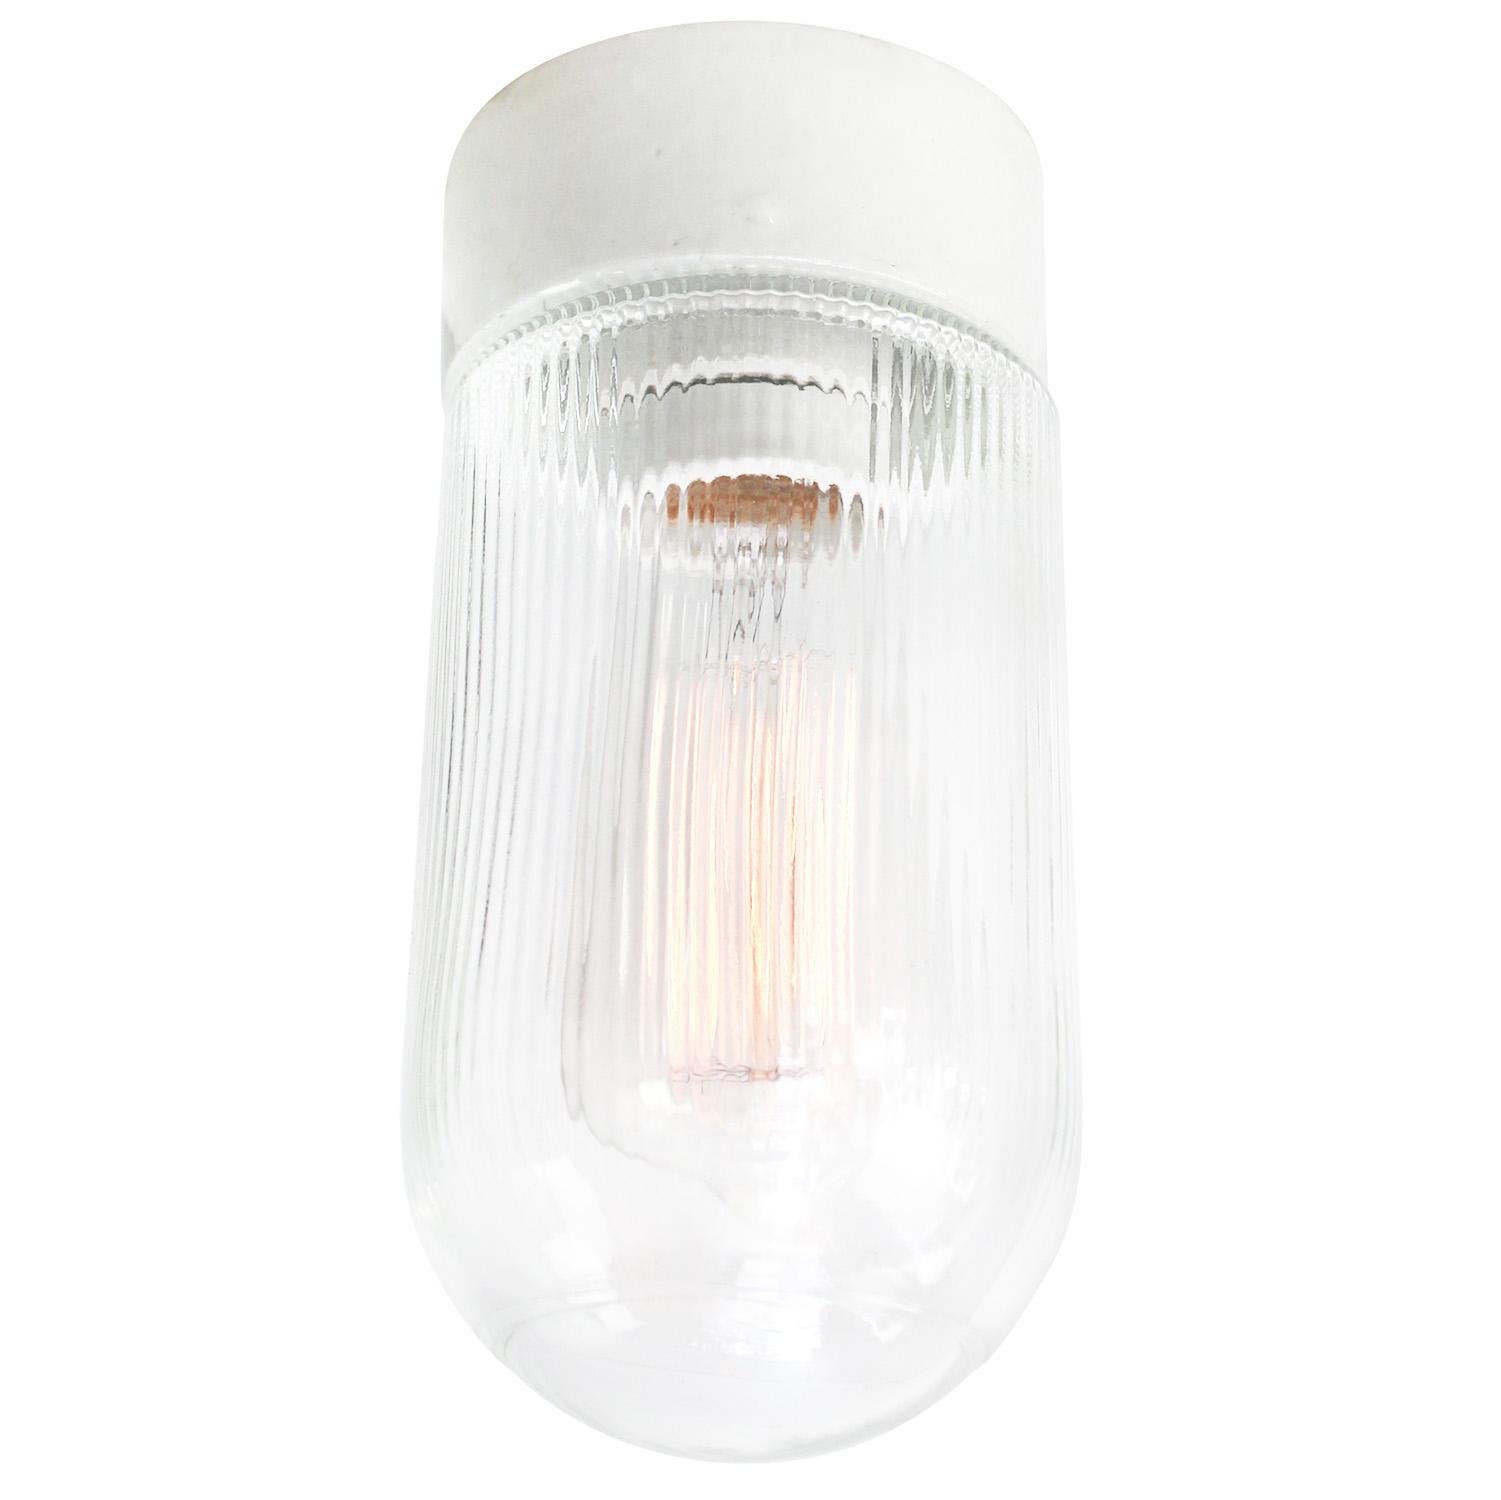 Industrial wall / ceiling / flush mount lamp. White porcelain. Clear glass.

2 conductors, no ground.
Measures: Diameter foot 10 cm
Suitable for 110 volt USA
new wiring is CE certified (220 volt)  or UL Listed (110 volt) 

Weight: 0.90 kg / 2